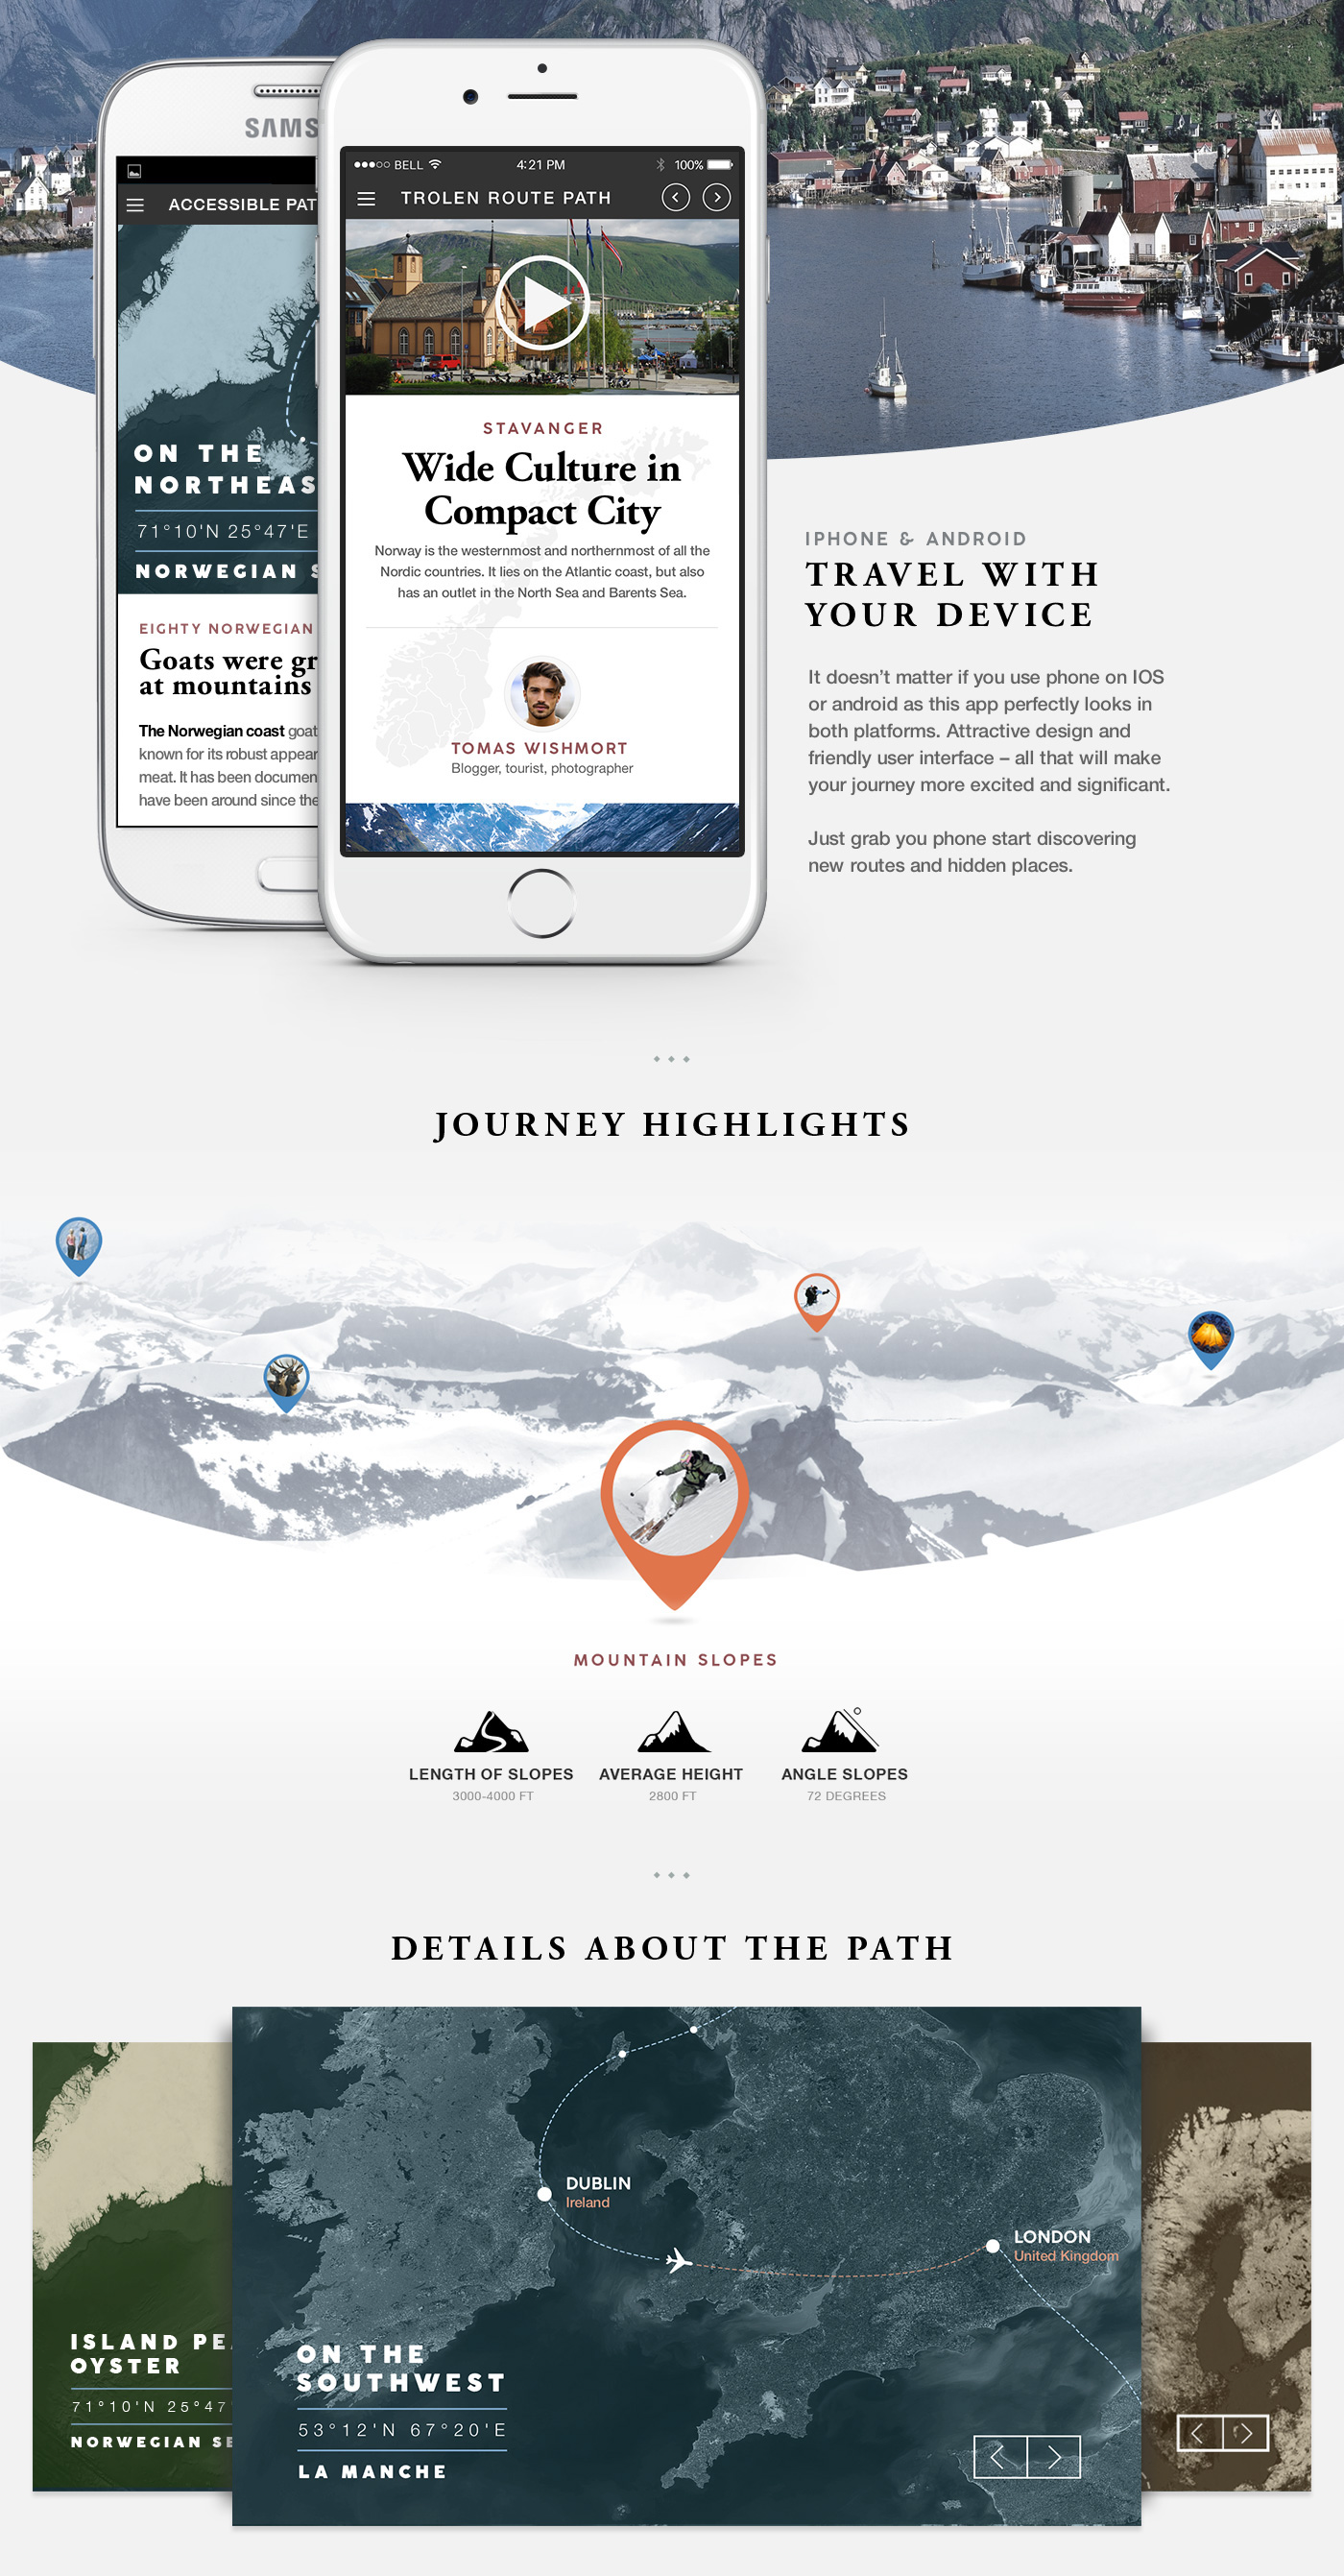 design norway application iphone Travel journey route path widget map statistic infographic mountains Ocean hiking